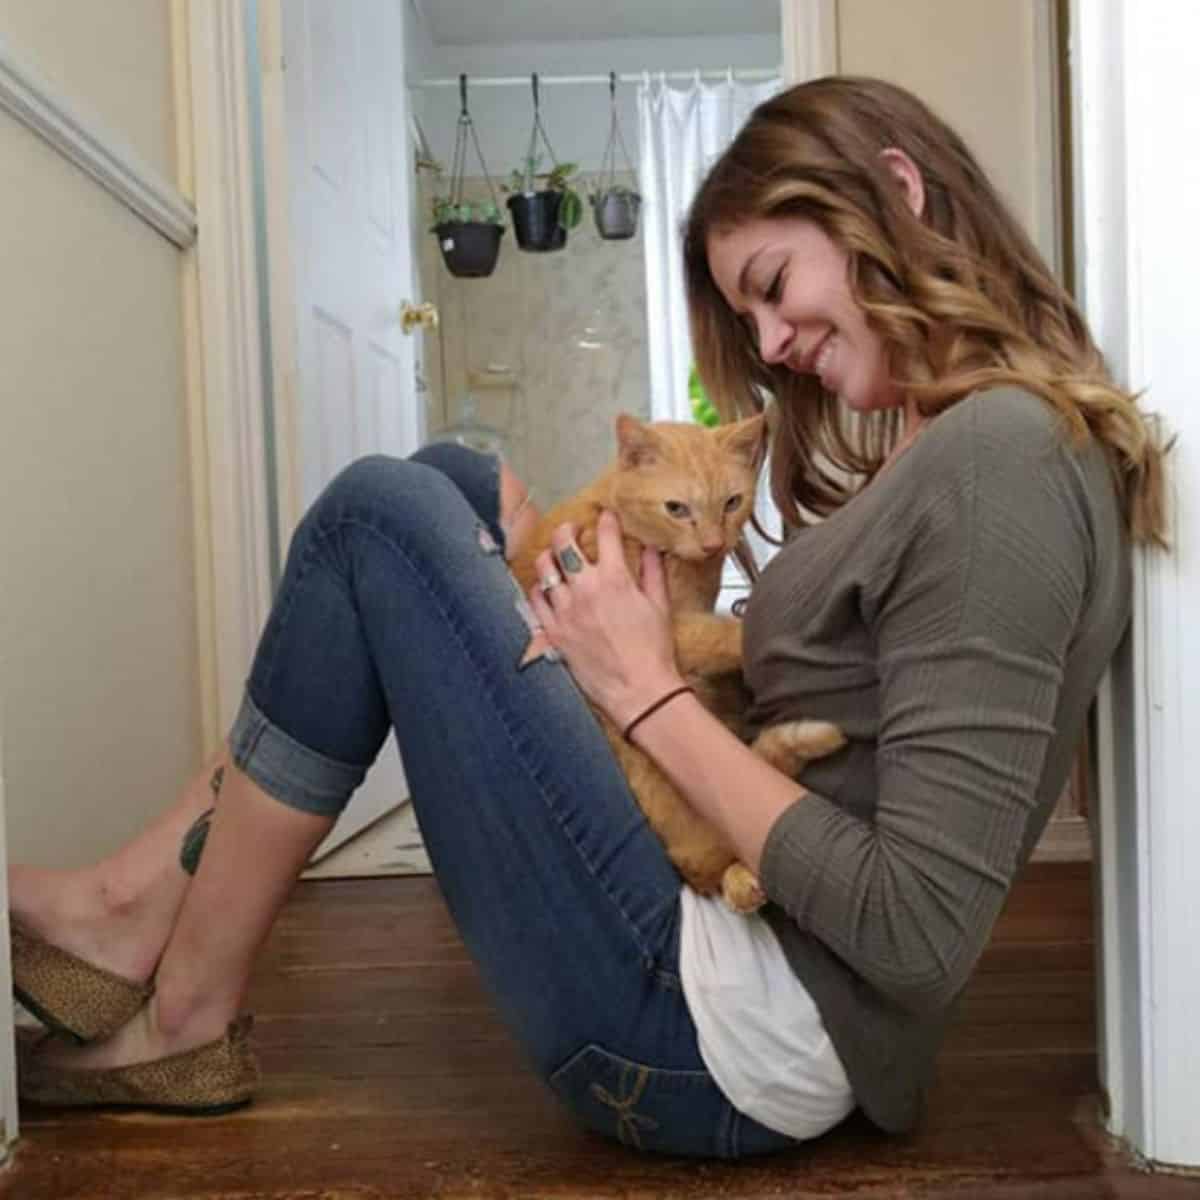 a smiling girl is sitting on the laminate floor and petting a cat